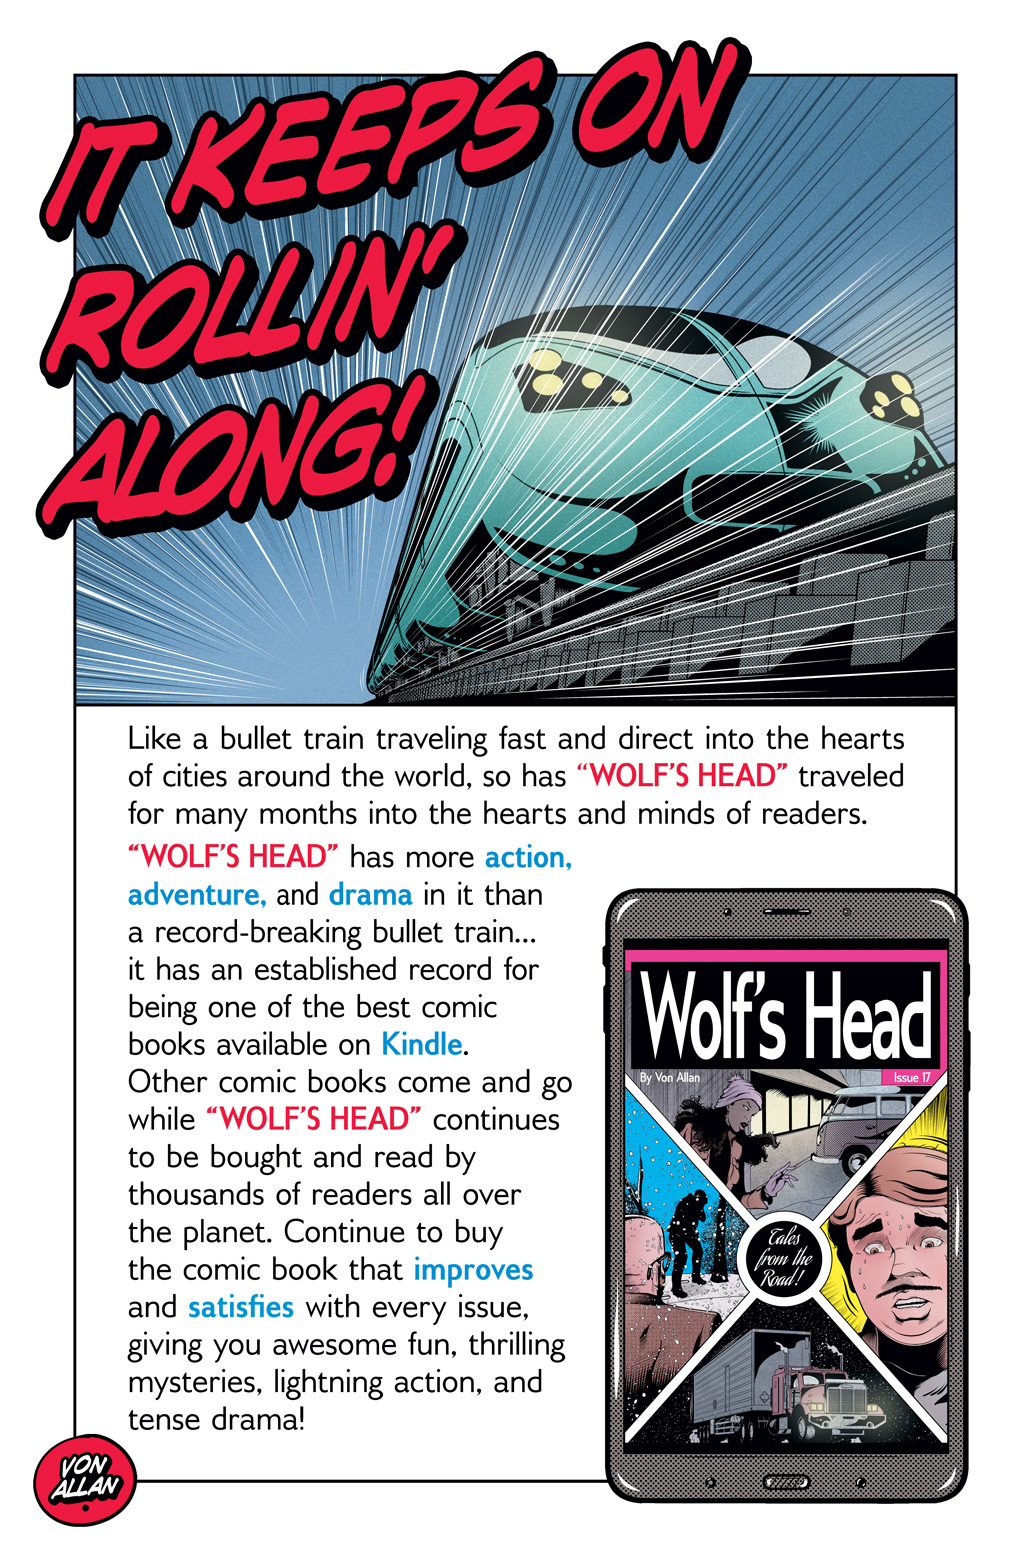 Teaser image of Wolf's Head issue 17 on Kindle